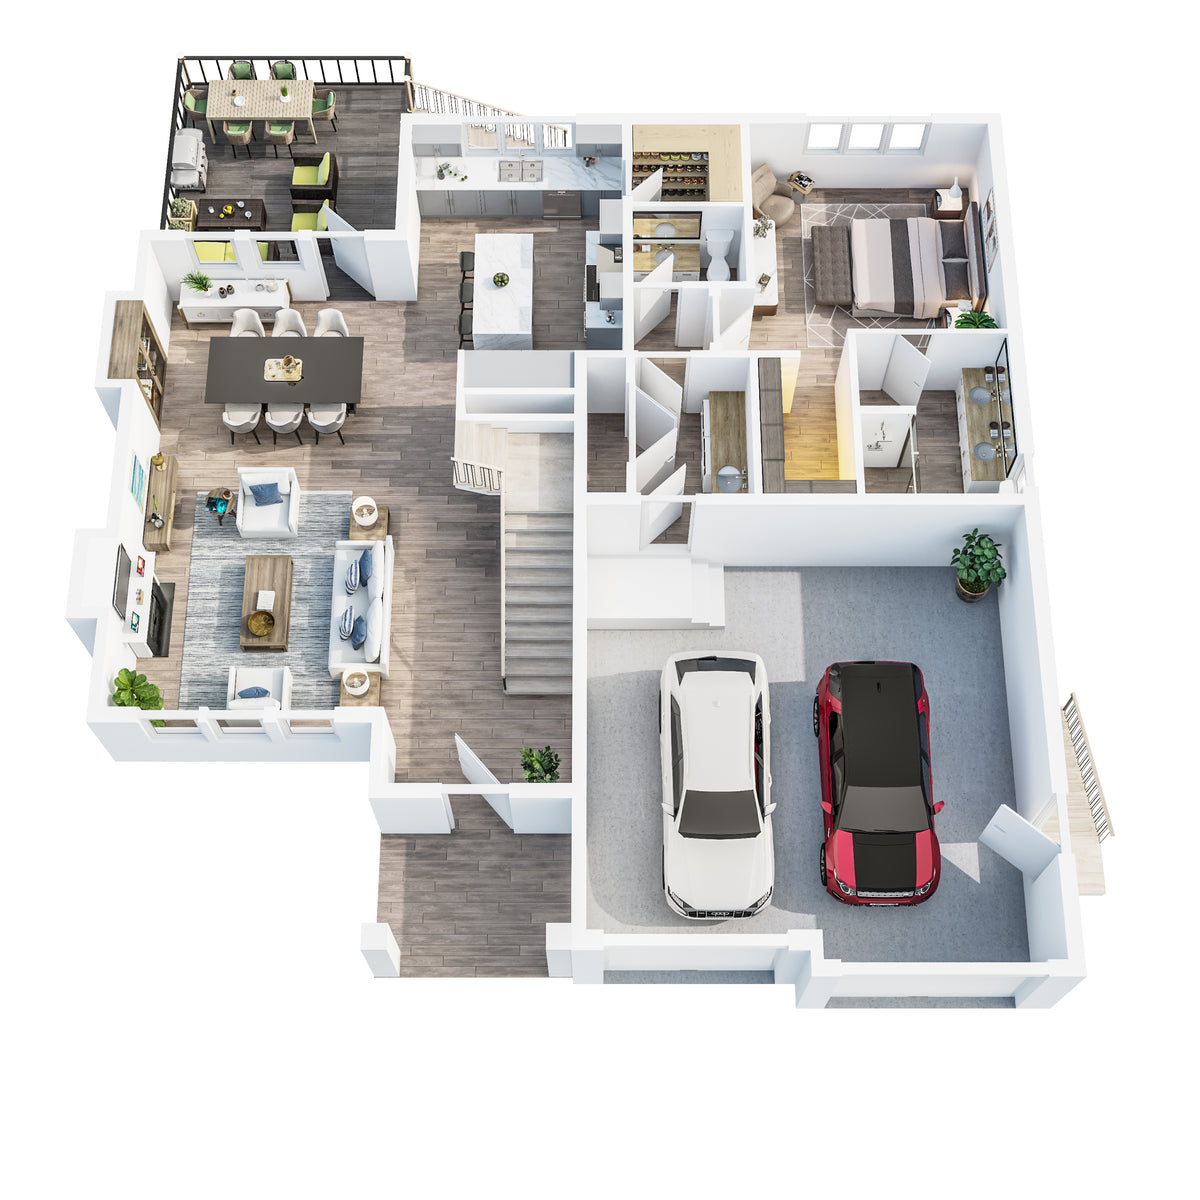 3D floor plan rendering. Full colour and perspective elements